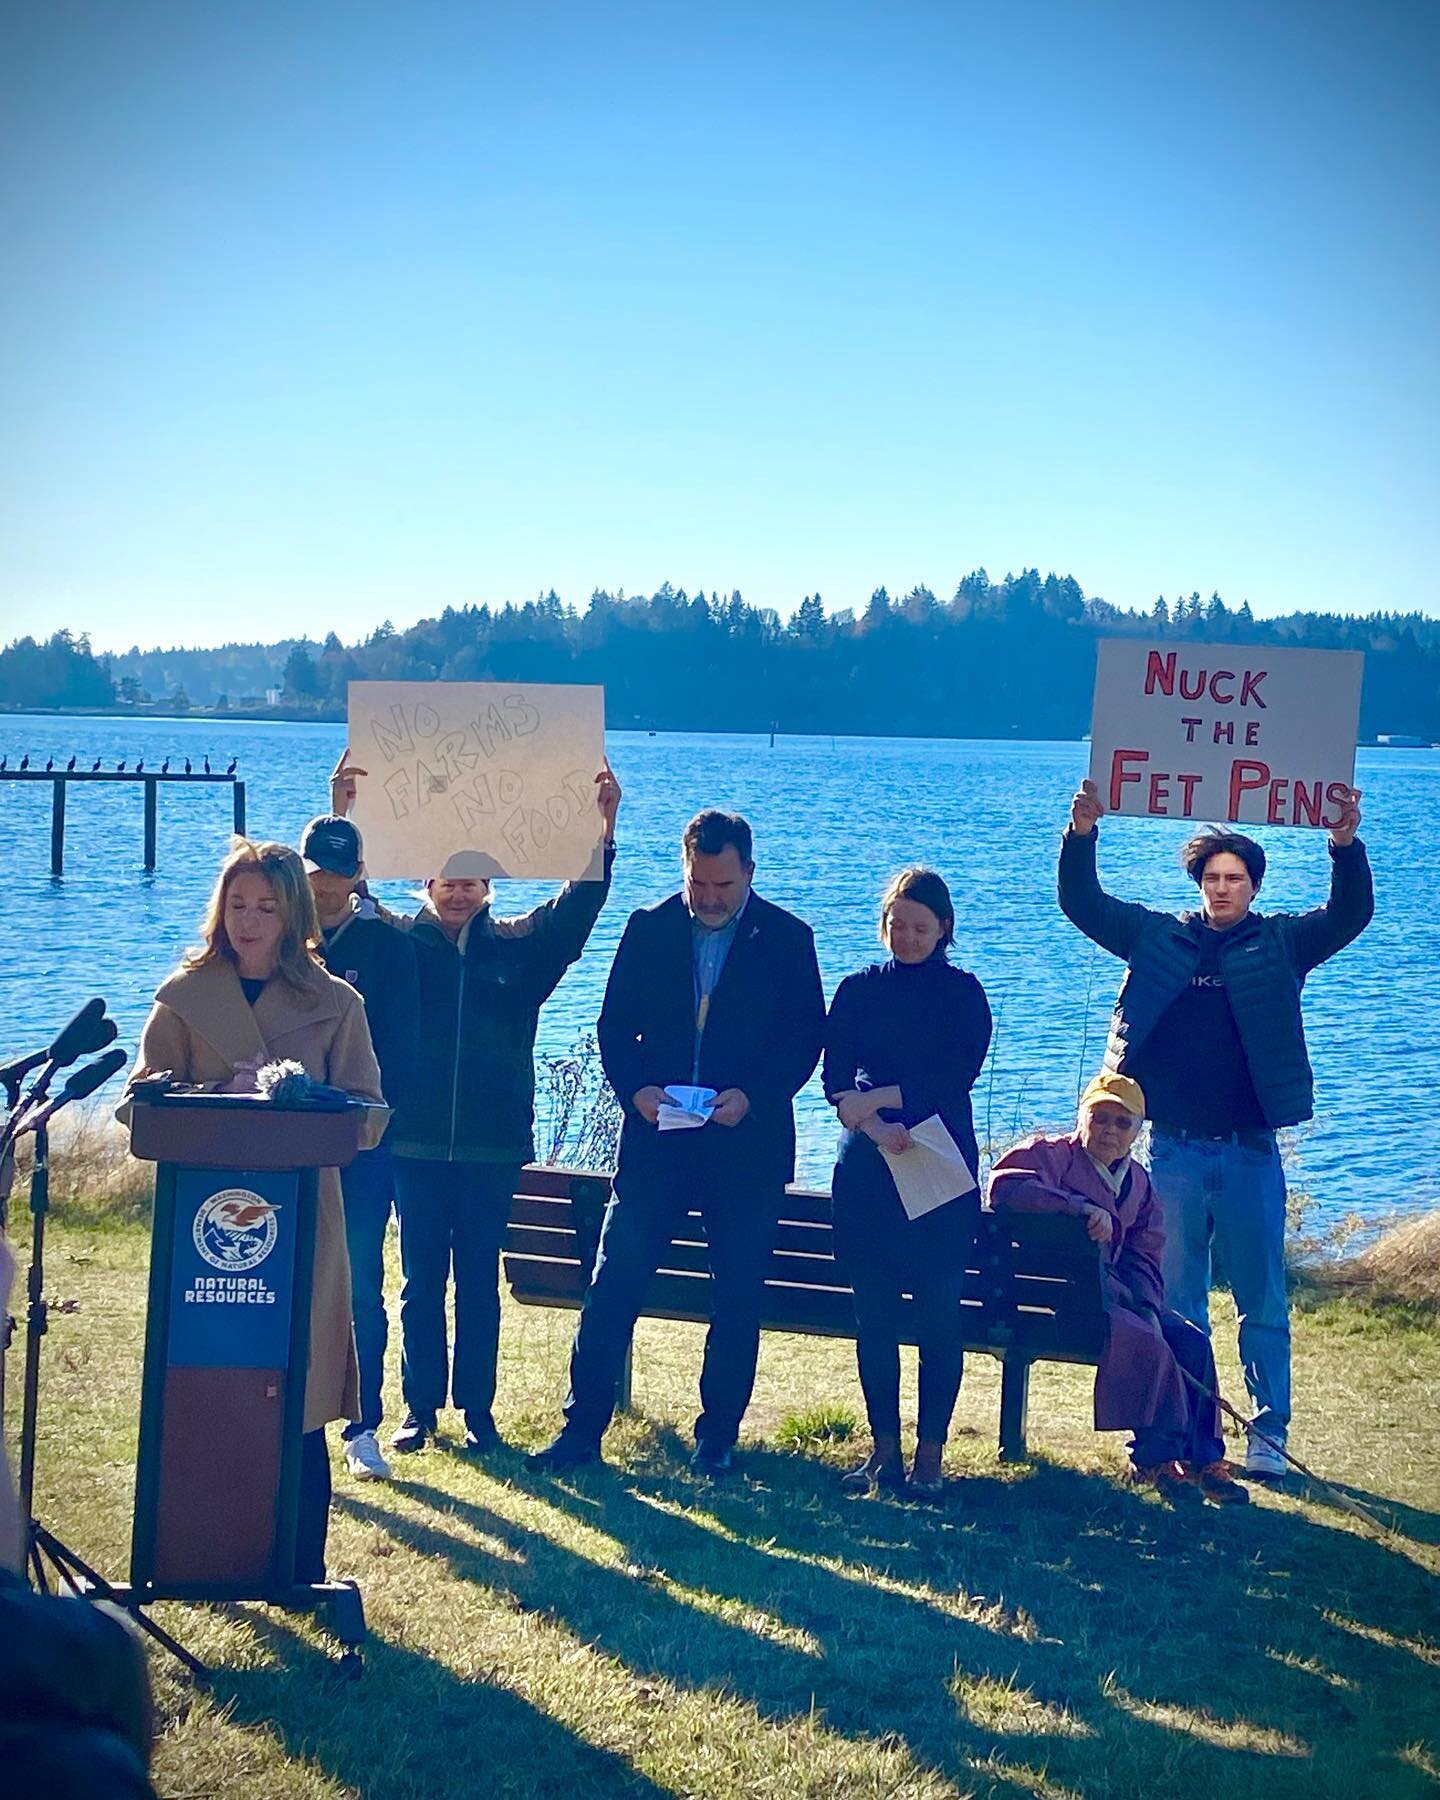 How it&rsquo;s going, 5 years later edition: Yesterday we gathered where the 2017 protest started to hear Washington State Commissioner of Public Lands, Hilary Franz, announce that Cooke Aquaculture&rsquo;s remaining Puget Sound net pens would be rem